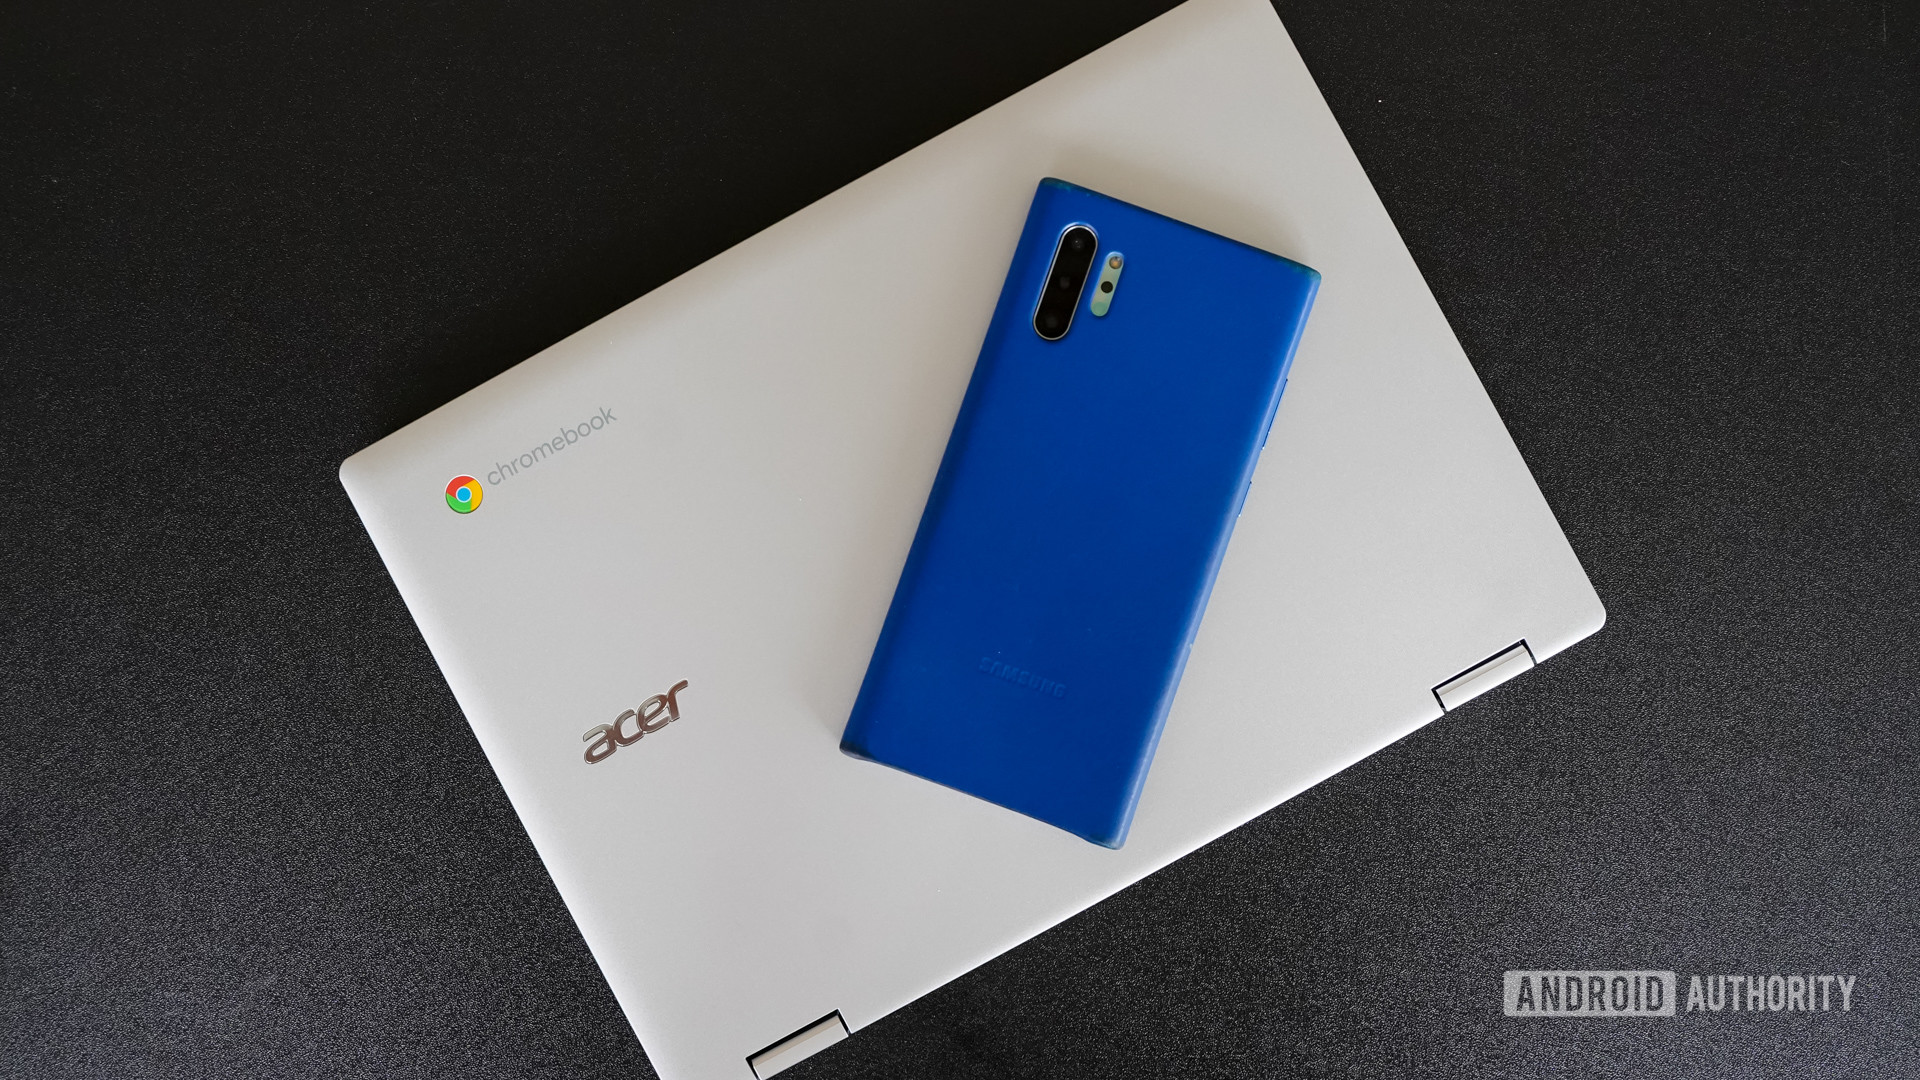 Acer Chromebook Spin 311 review: An easy choice for most people